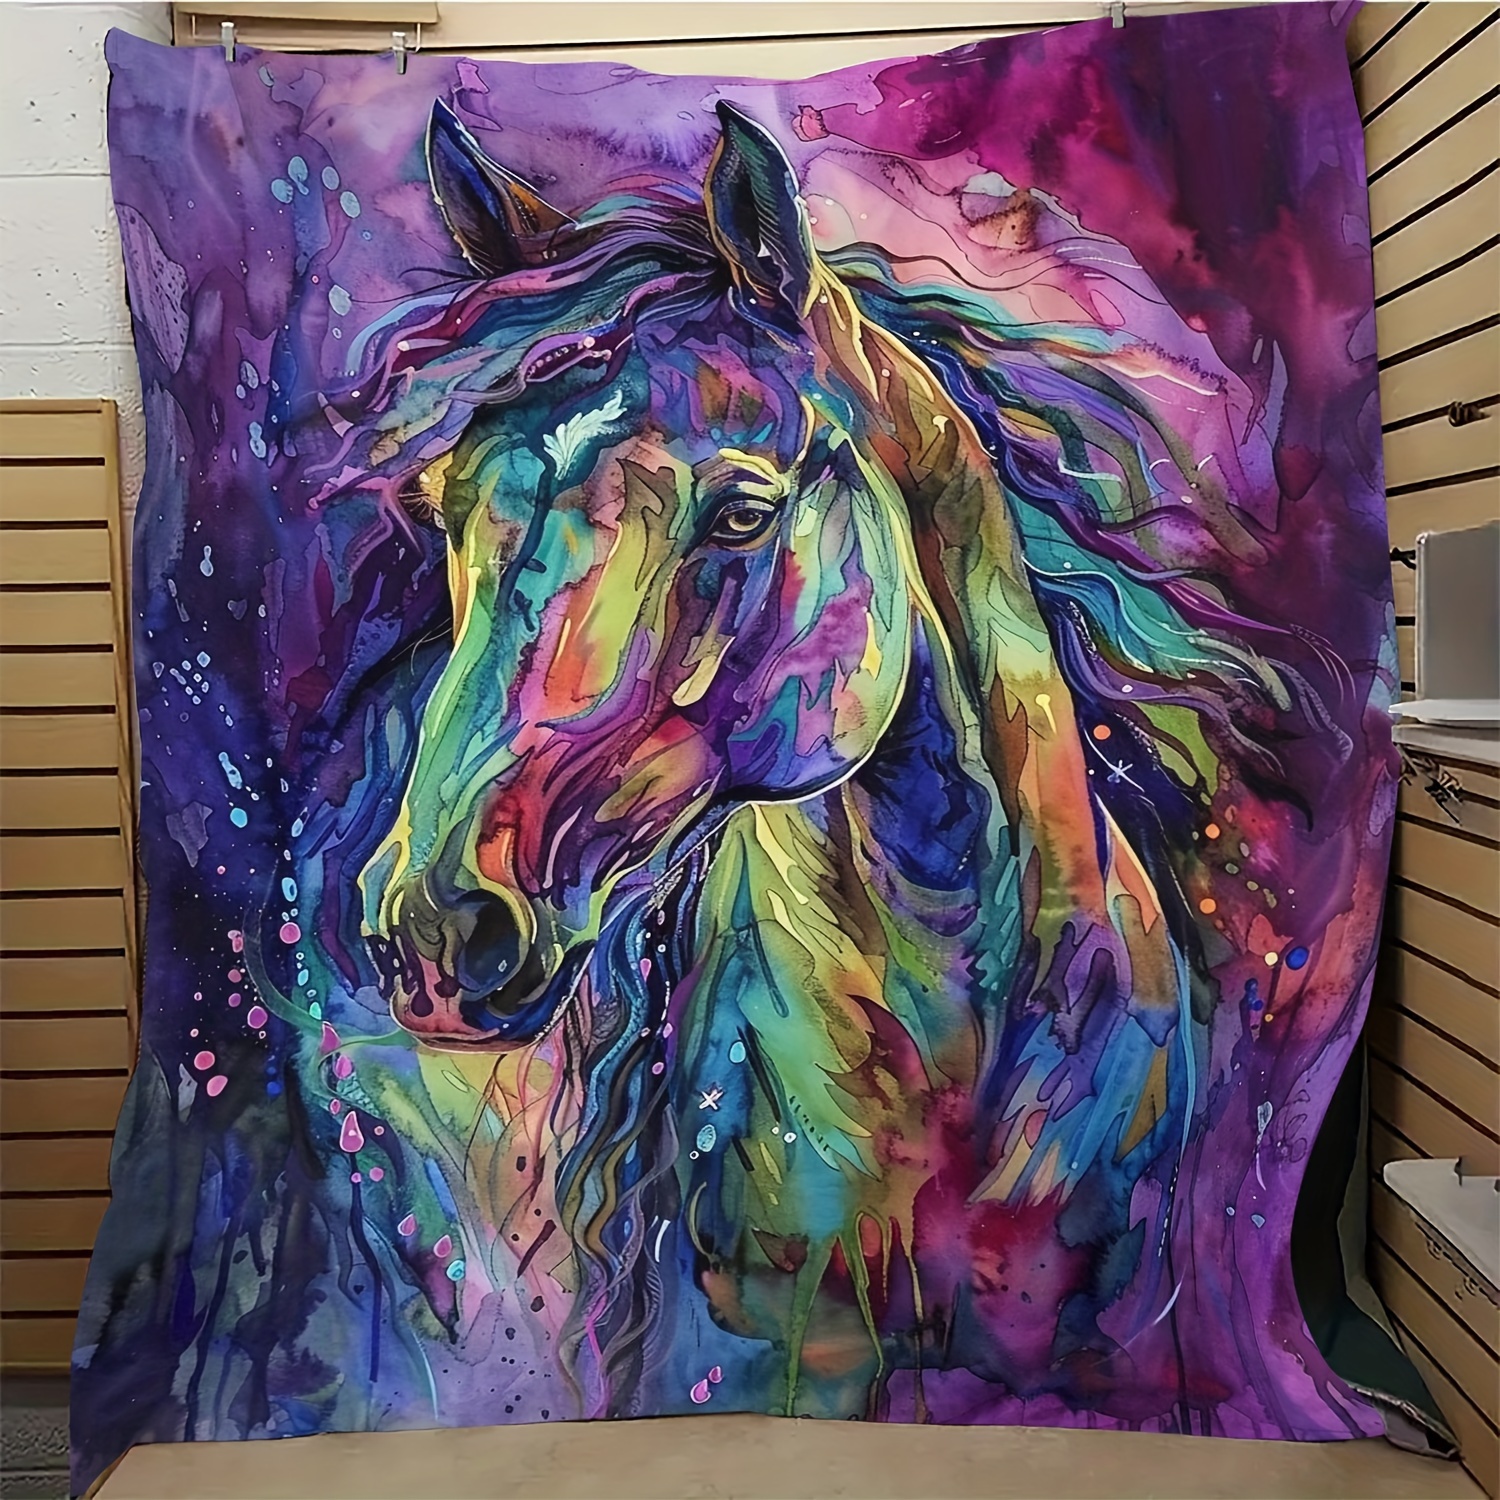 

1pc Creative Colorful Painting Horse Pattern Blanket Soft Blanket Flannel Blanket Warm Skin-friendly Office Nap Throw Blanket, Sofa Bed Blanket